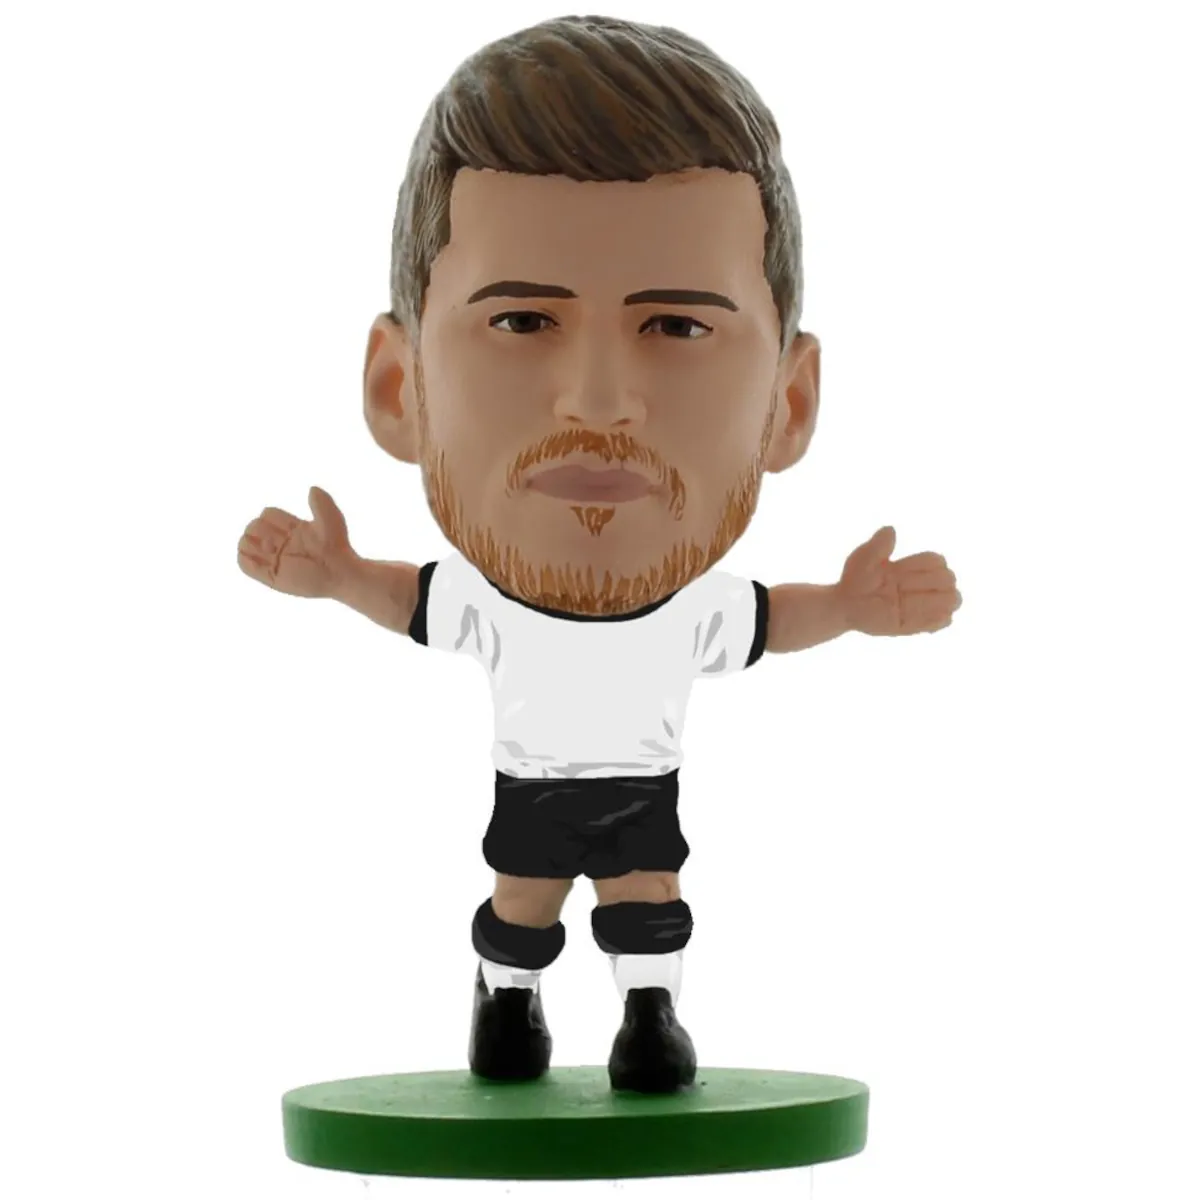 173478 Germany SoccerStarz Collectable Figure - Timo Werner